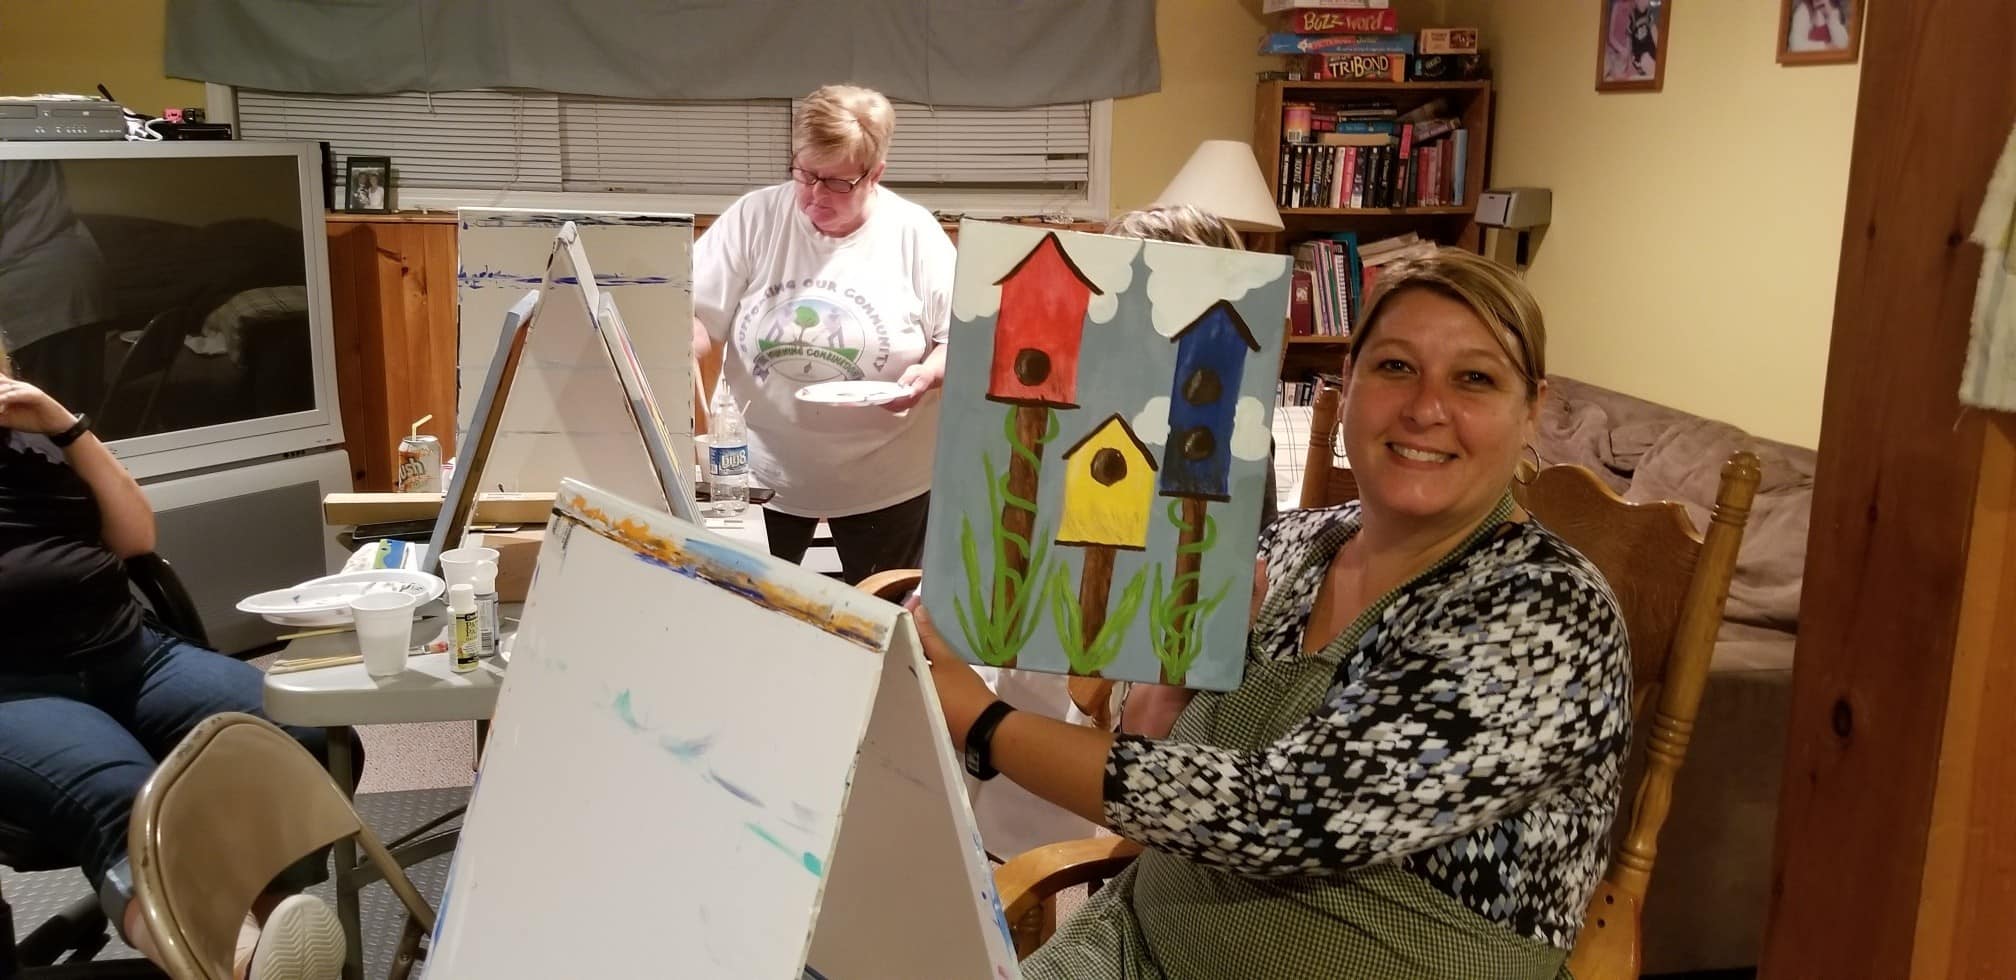 Tanya Young shows her painting at a paint night in New Glasgow